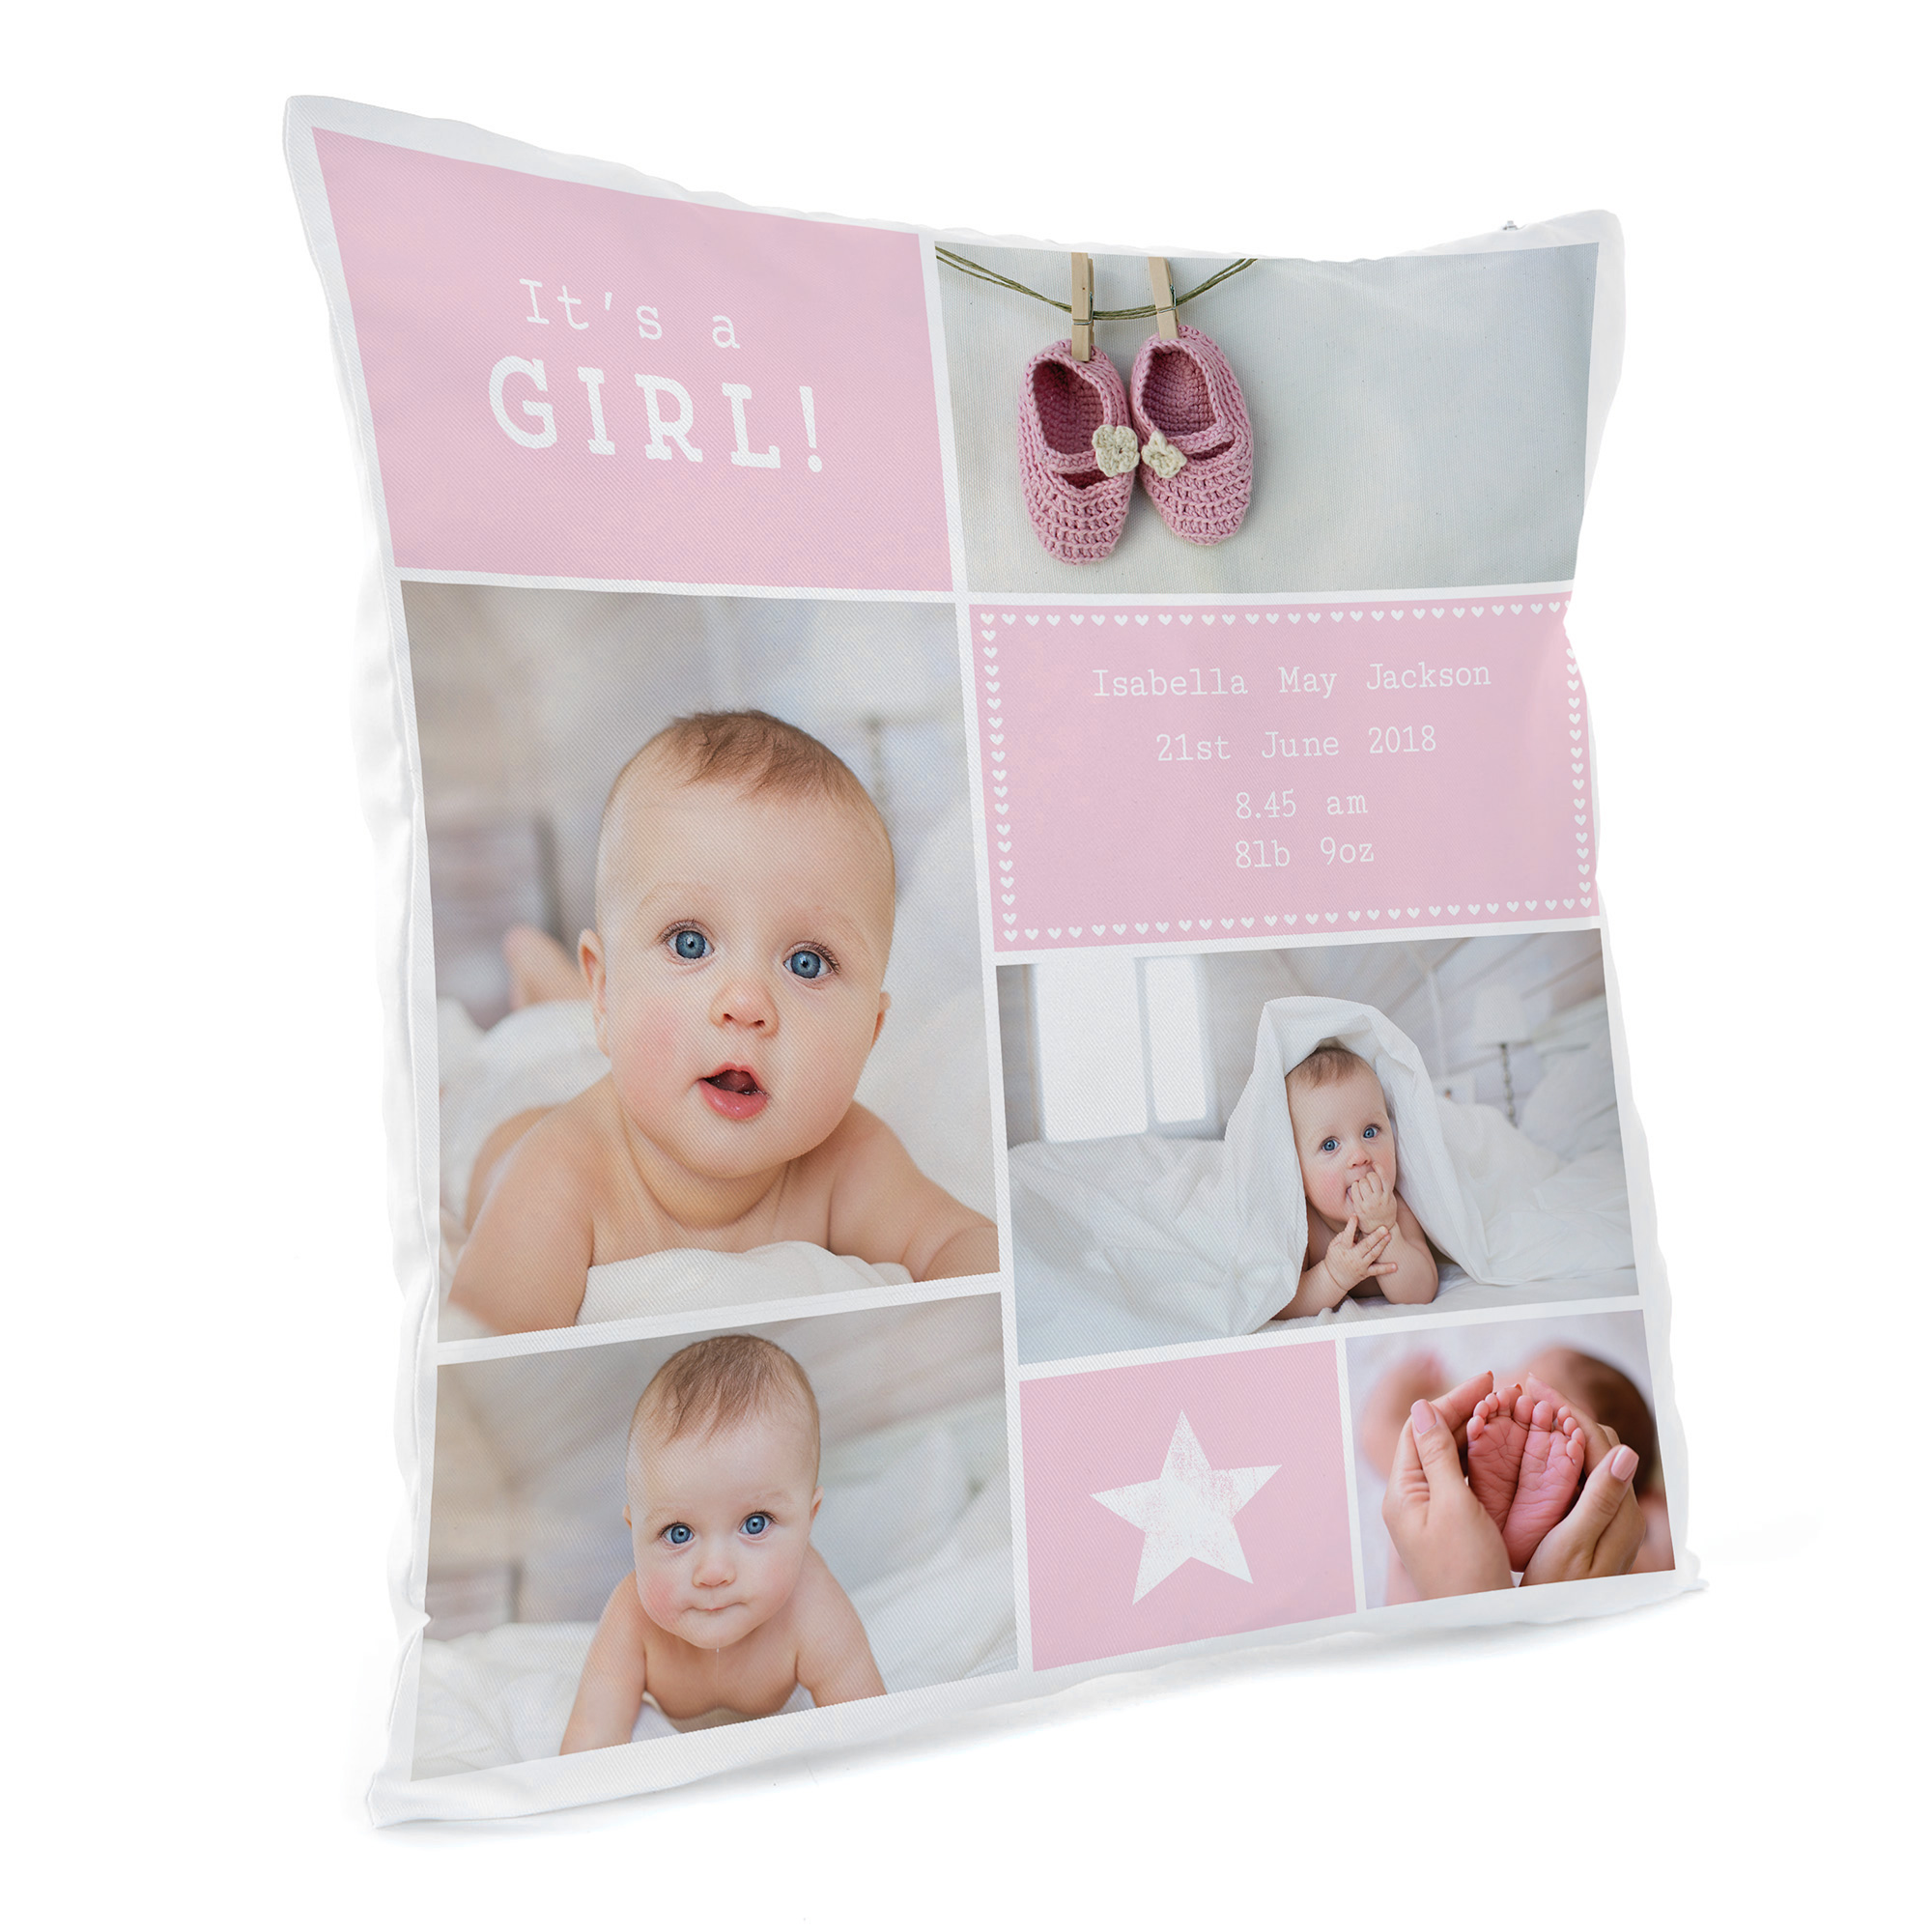 Personalised Photo Cushion - It's A Girl!